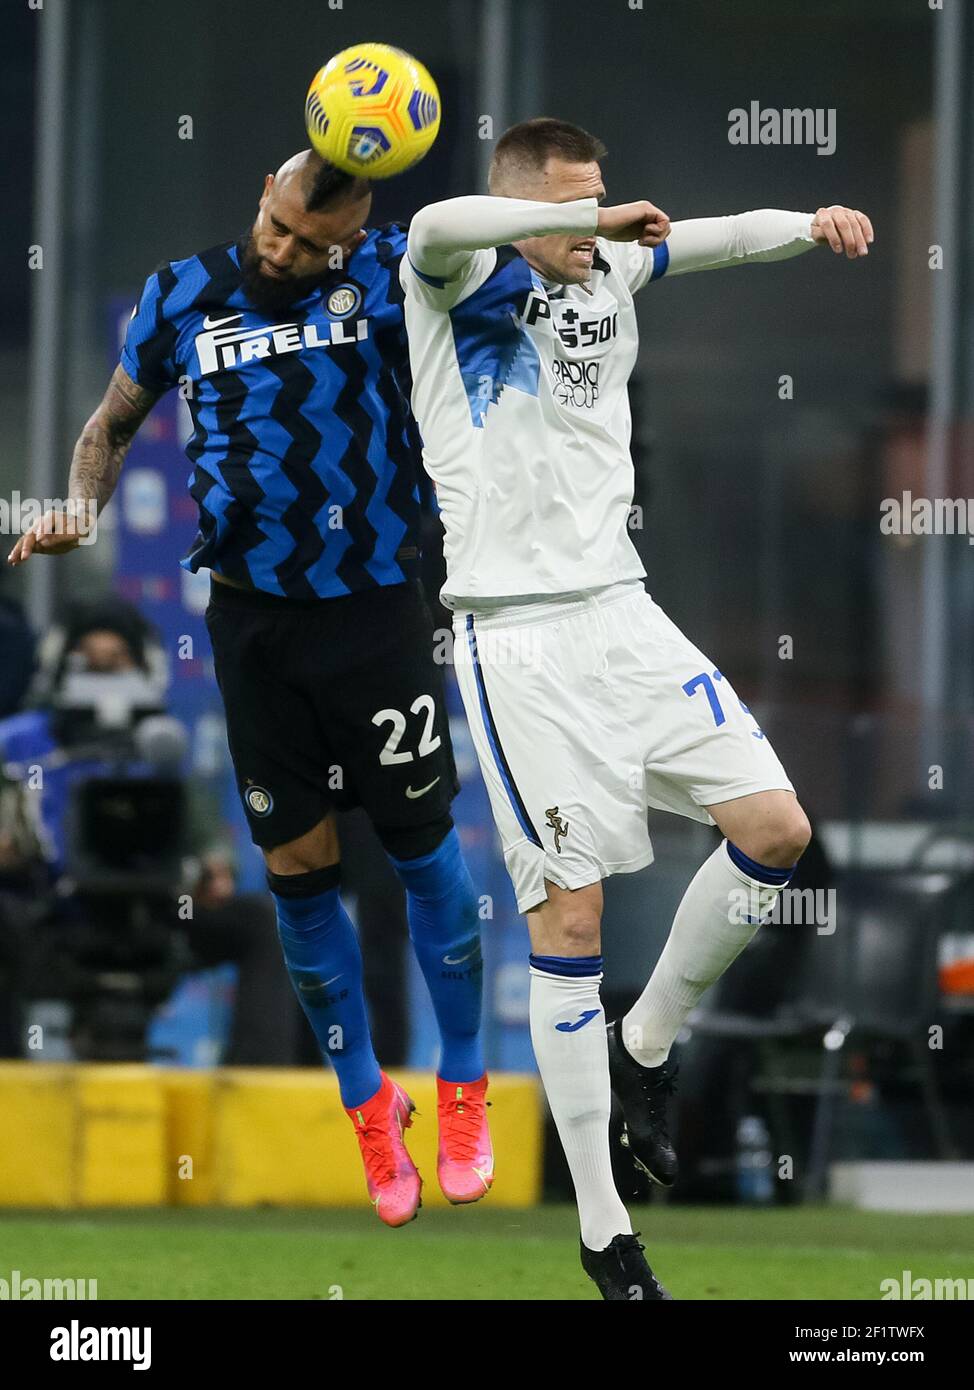 MILAN, ITALY - MARCH 8: Atruro Vidal of Internazionale and Josip Ilicic of Atalanta during the Serie A match between Internazionale and Atalanta BC at Stock Photo